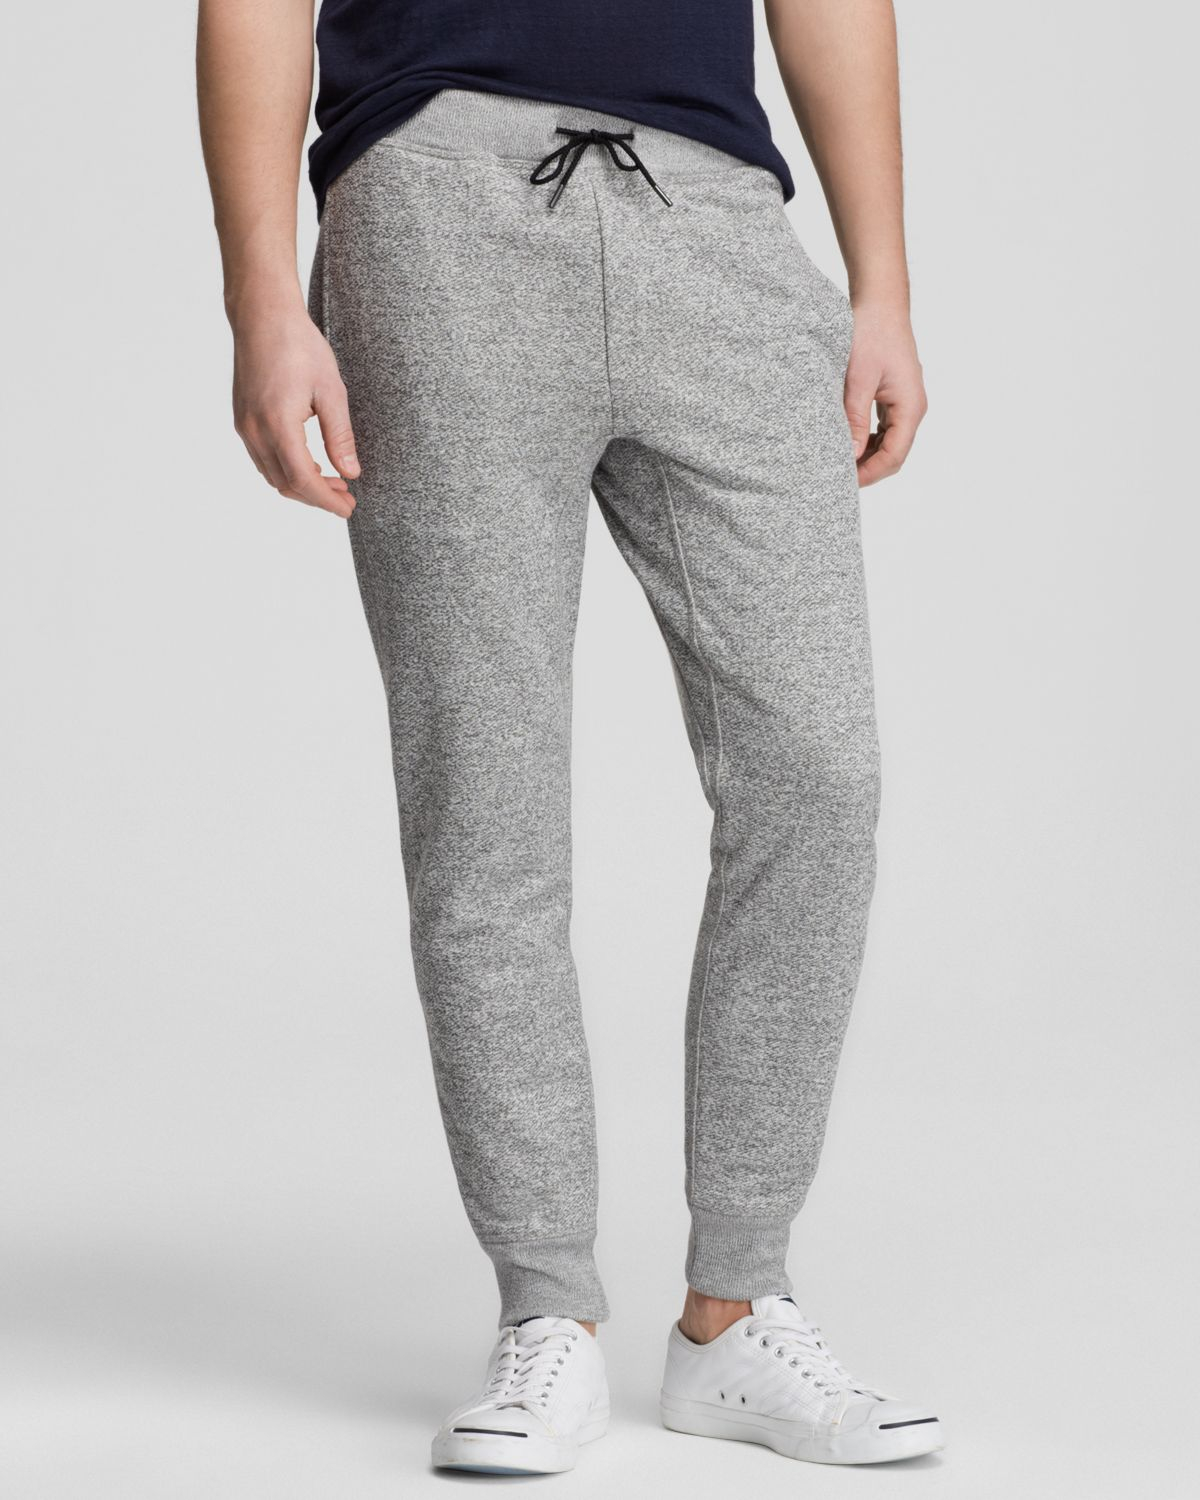 Lyst - Theory Static Terry Morris Sweatpants in Gray for Men